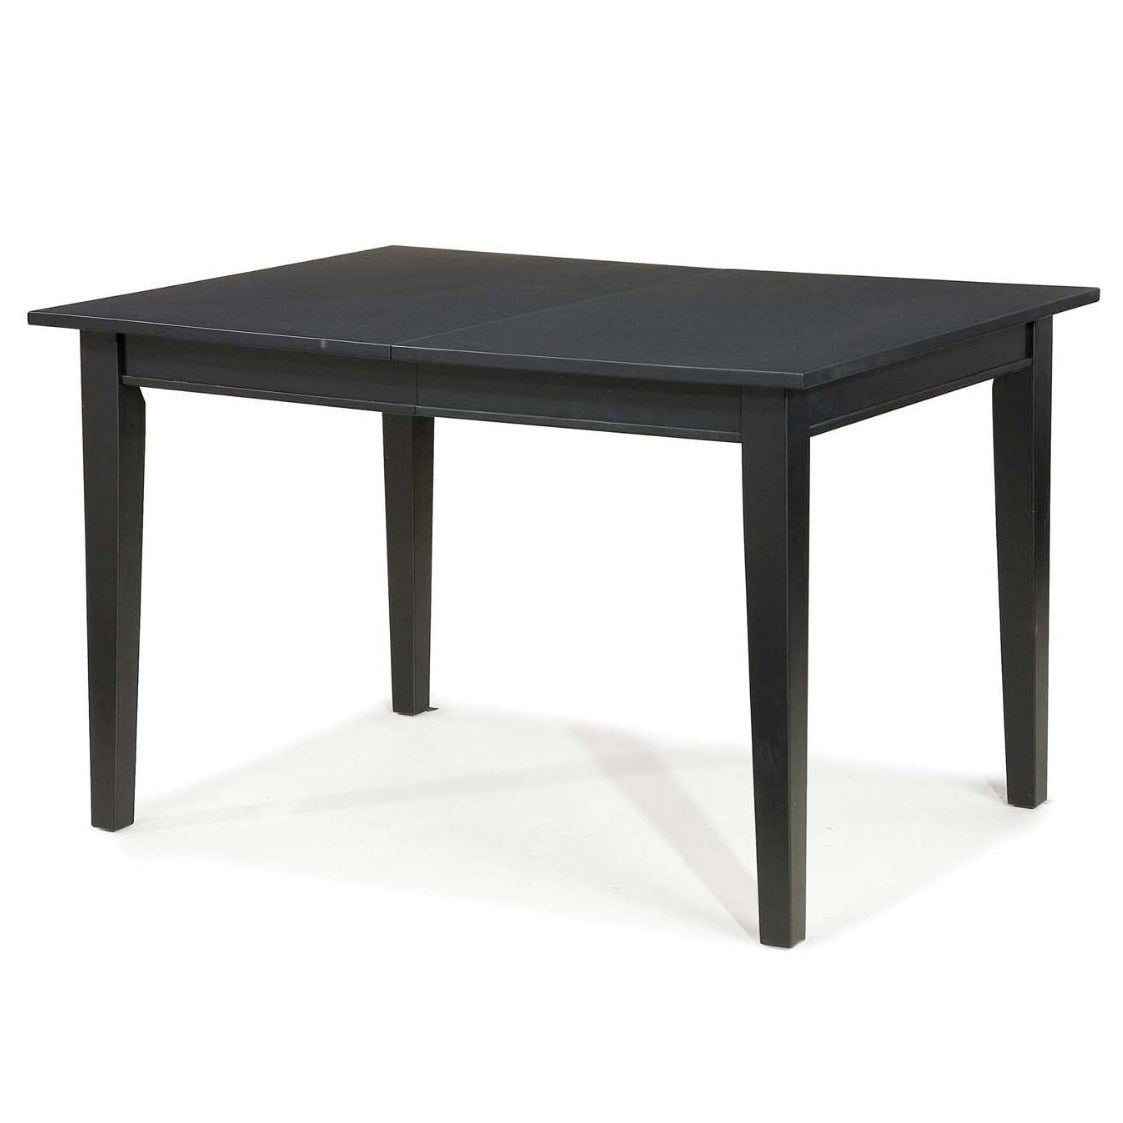 Dining > Dining Tables - Space Saving Expandable Dining Table 48-66-inch In Ebony Black Wood Finish